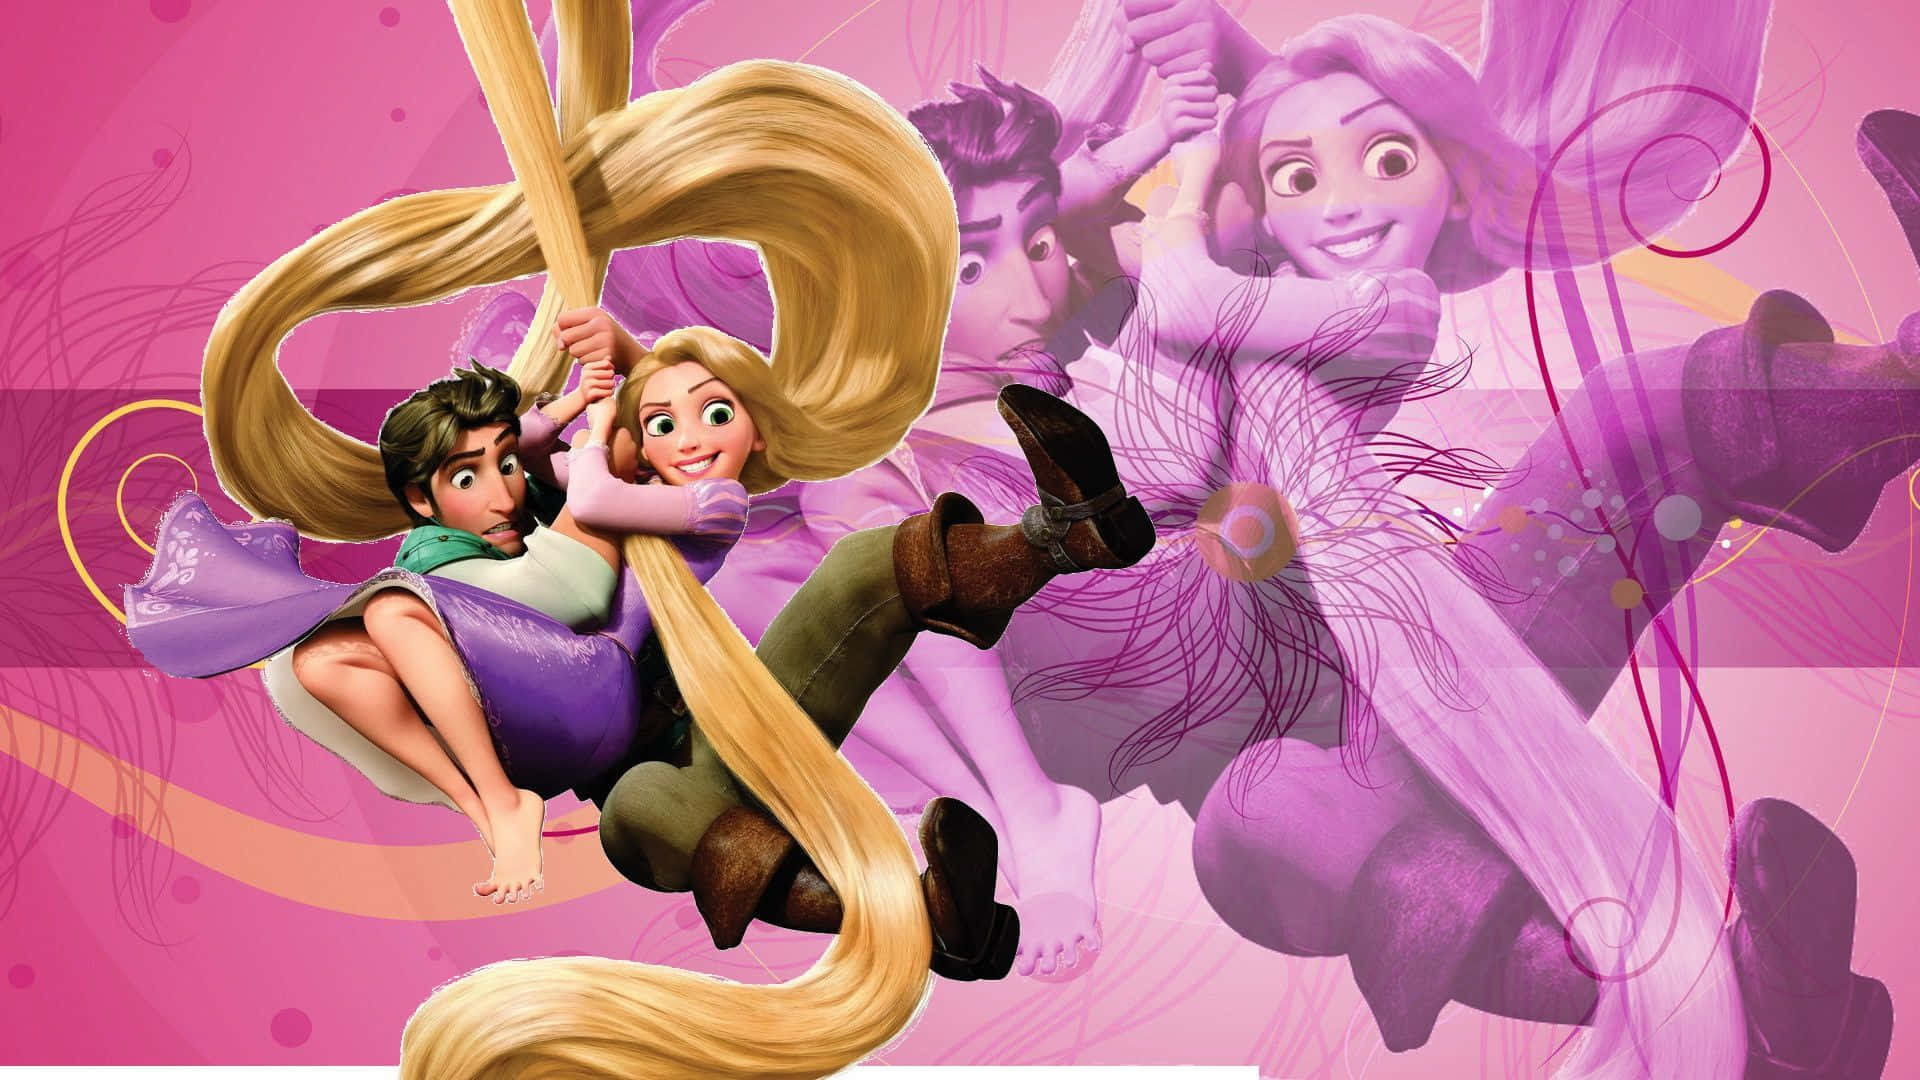 Unraveling the greatest adventures with Tangled